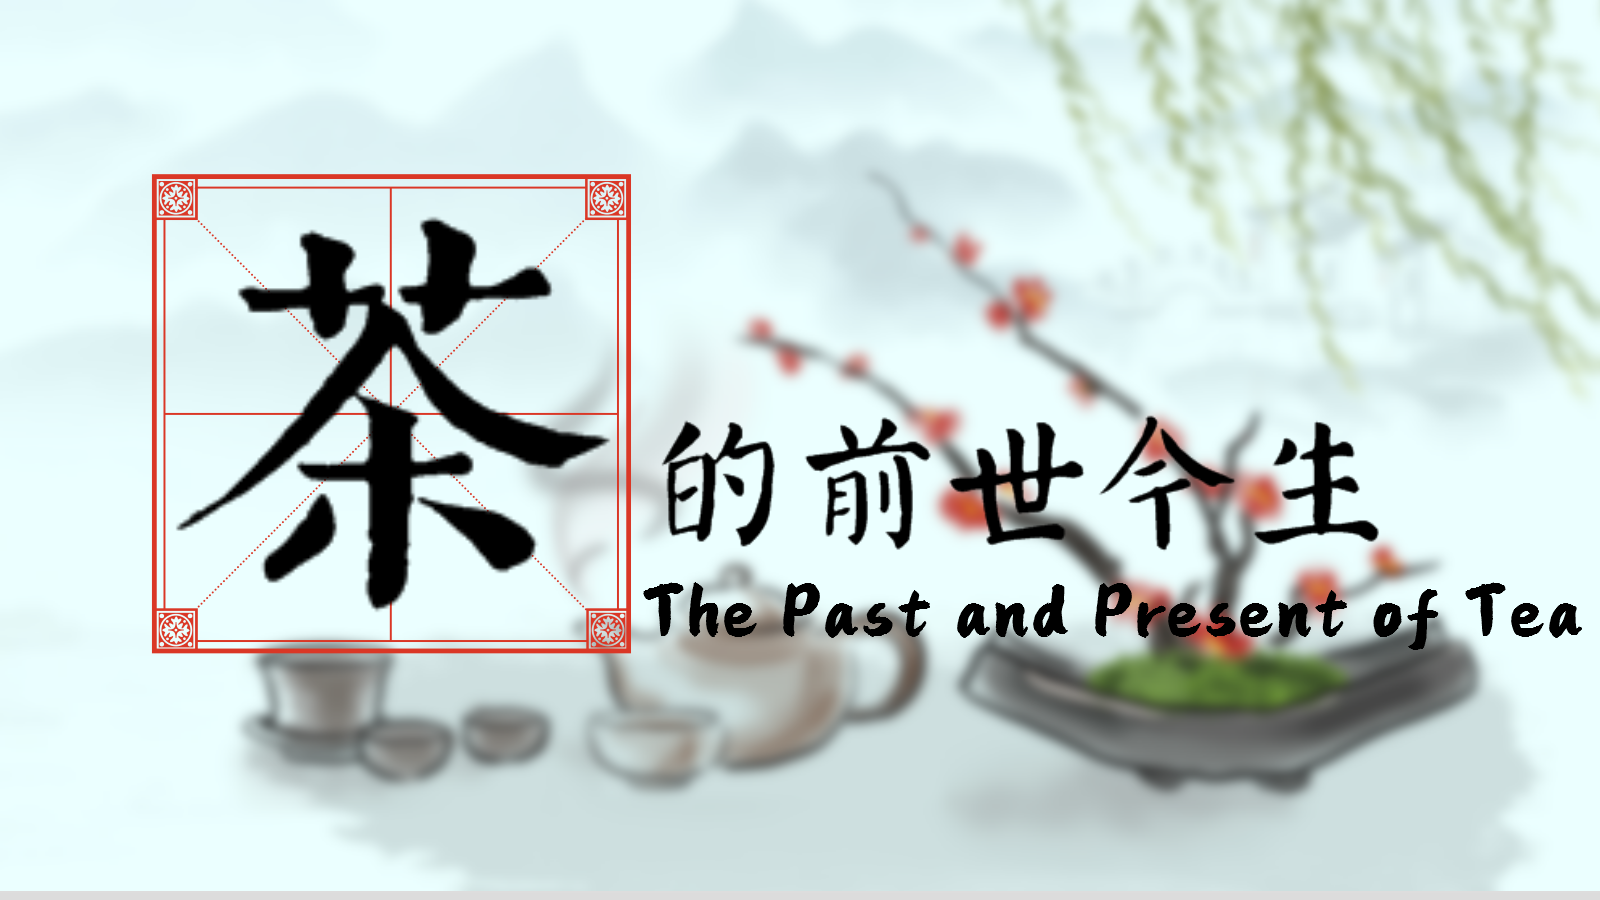 The Past and Present of Tea